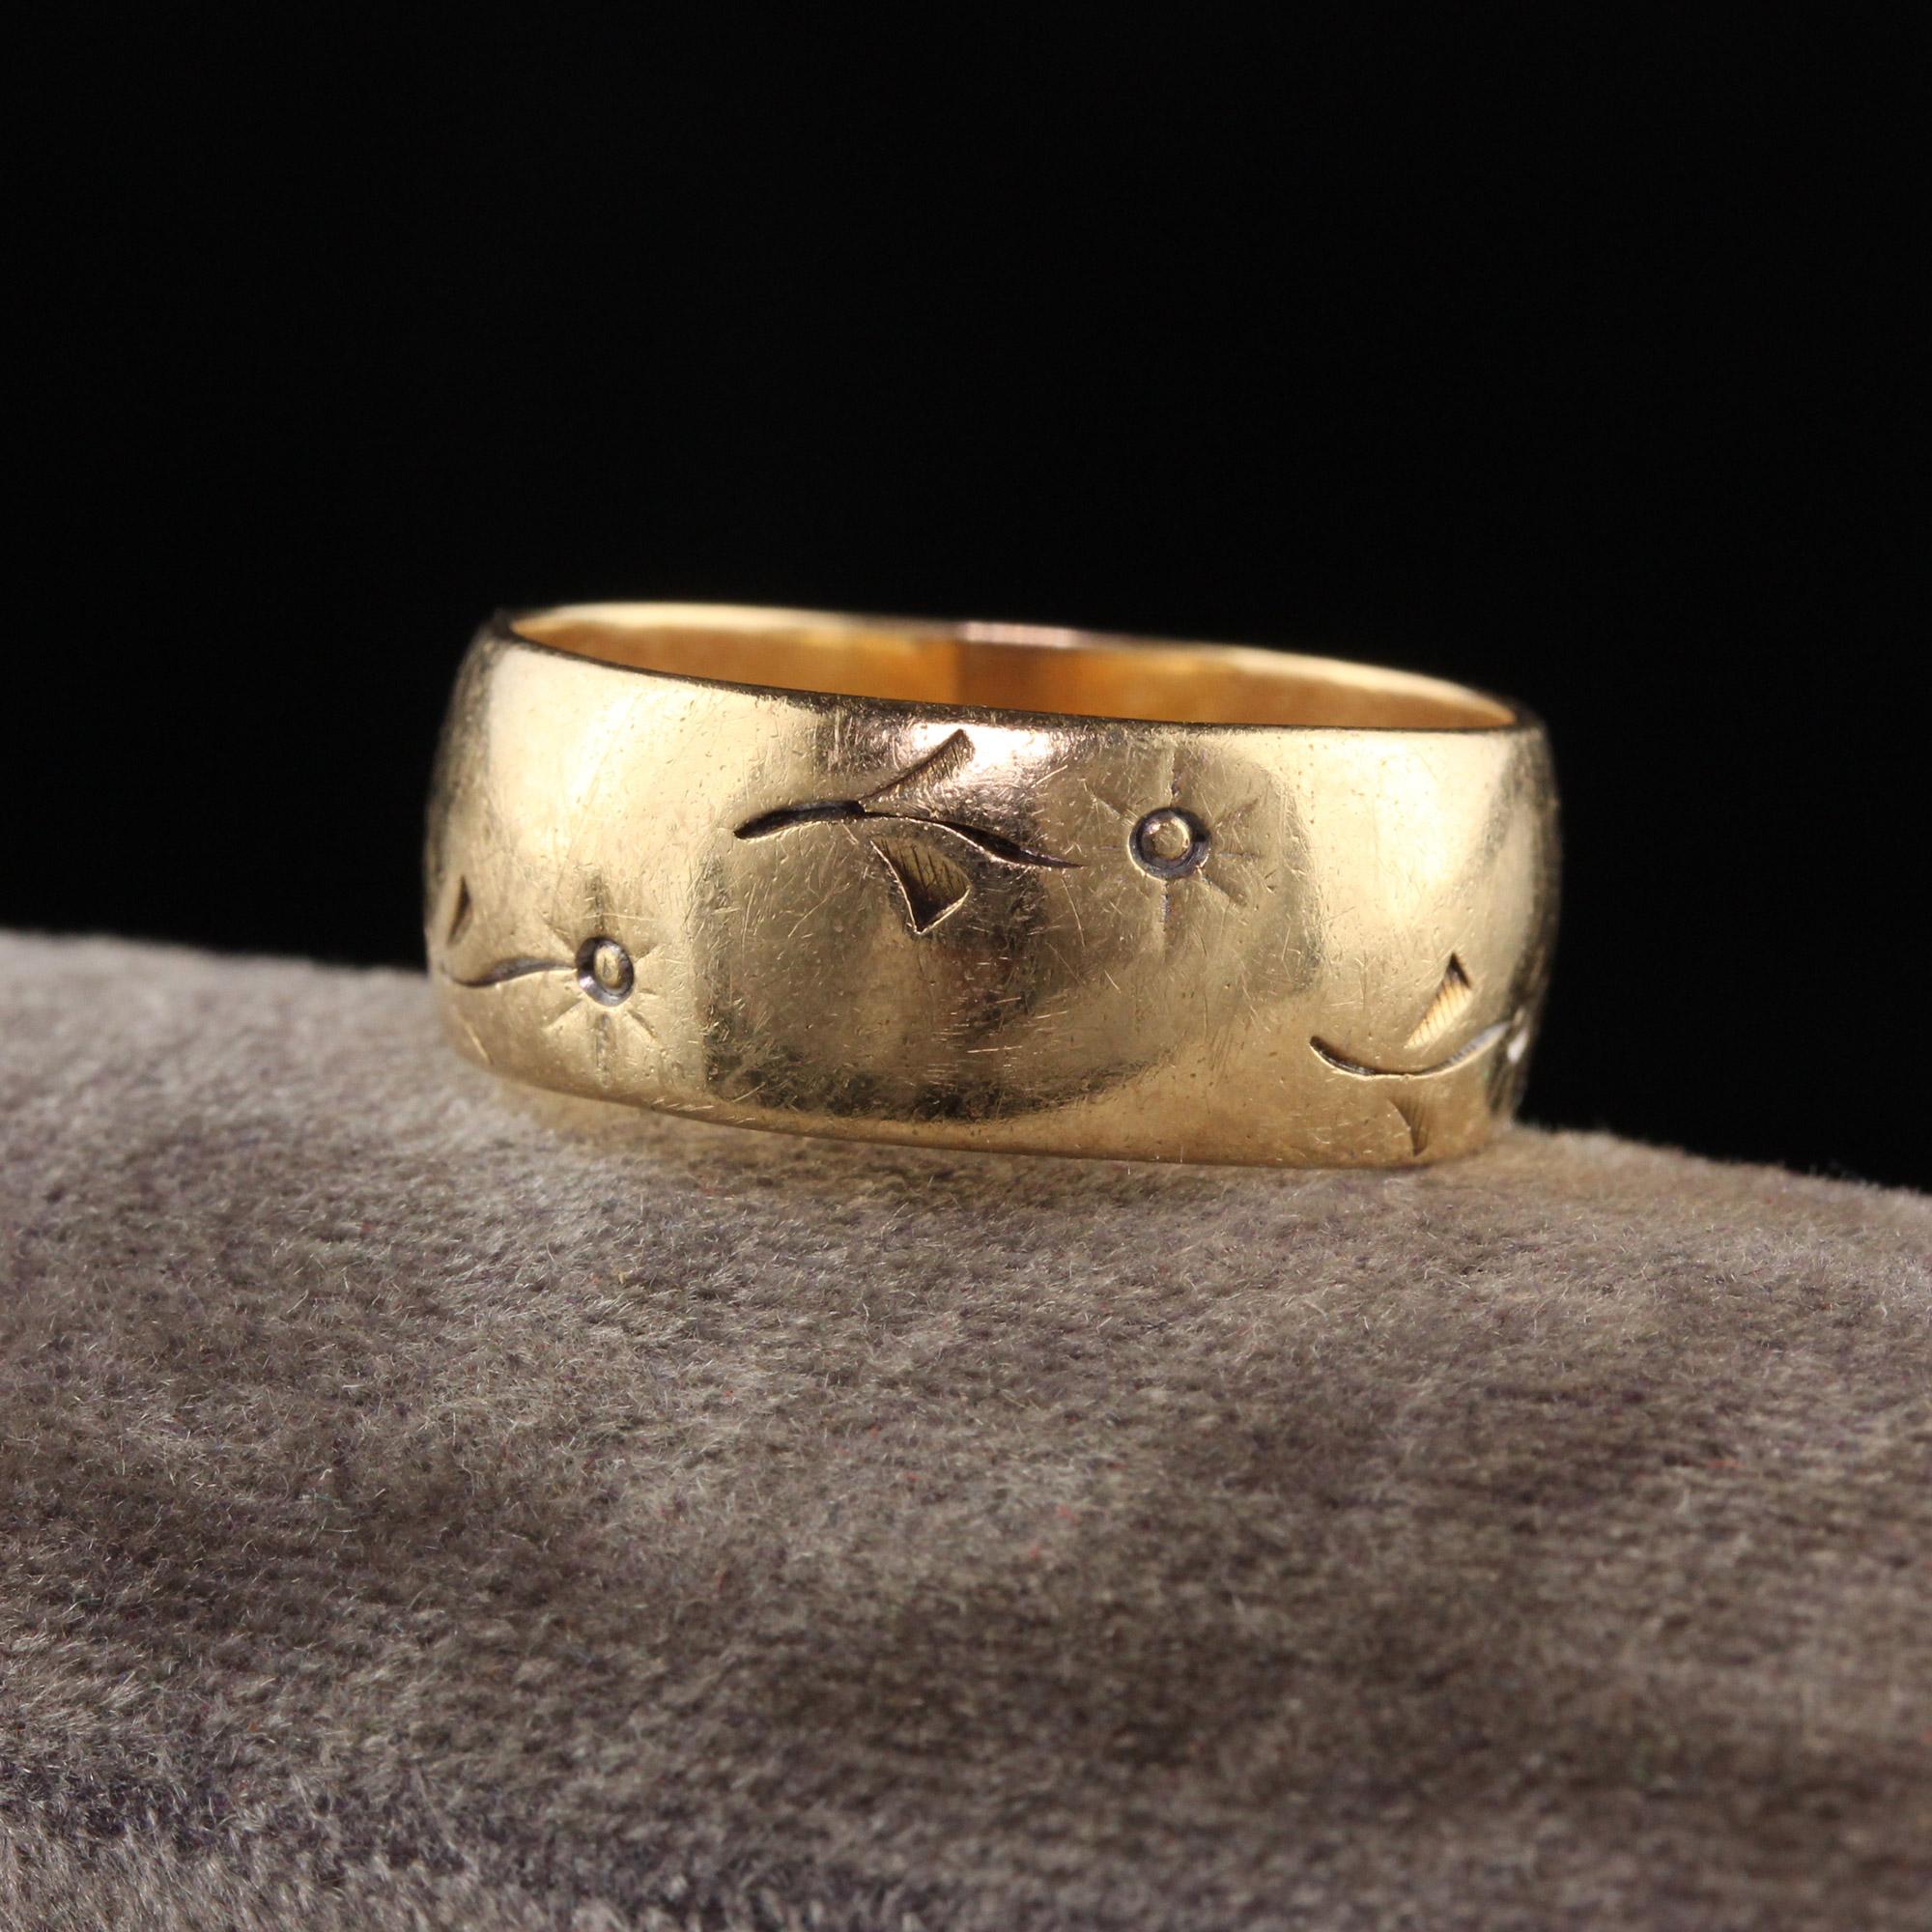 Beautiful Antique Art Deco 14K Yellow Gold Keepsake Flower Engraved Wedding Band. This beautiful band is crafted in 14k yellow gold. There are flower engravings going around the entire ring and it is in good condition.

Item #R1391

Metal: 14K